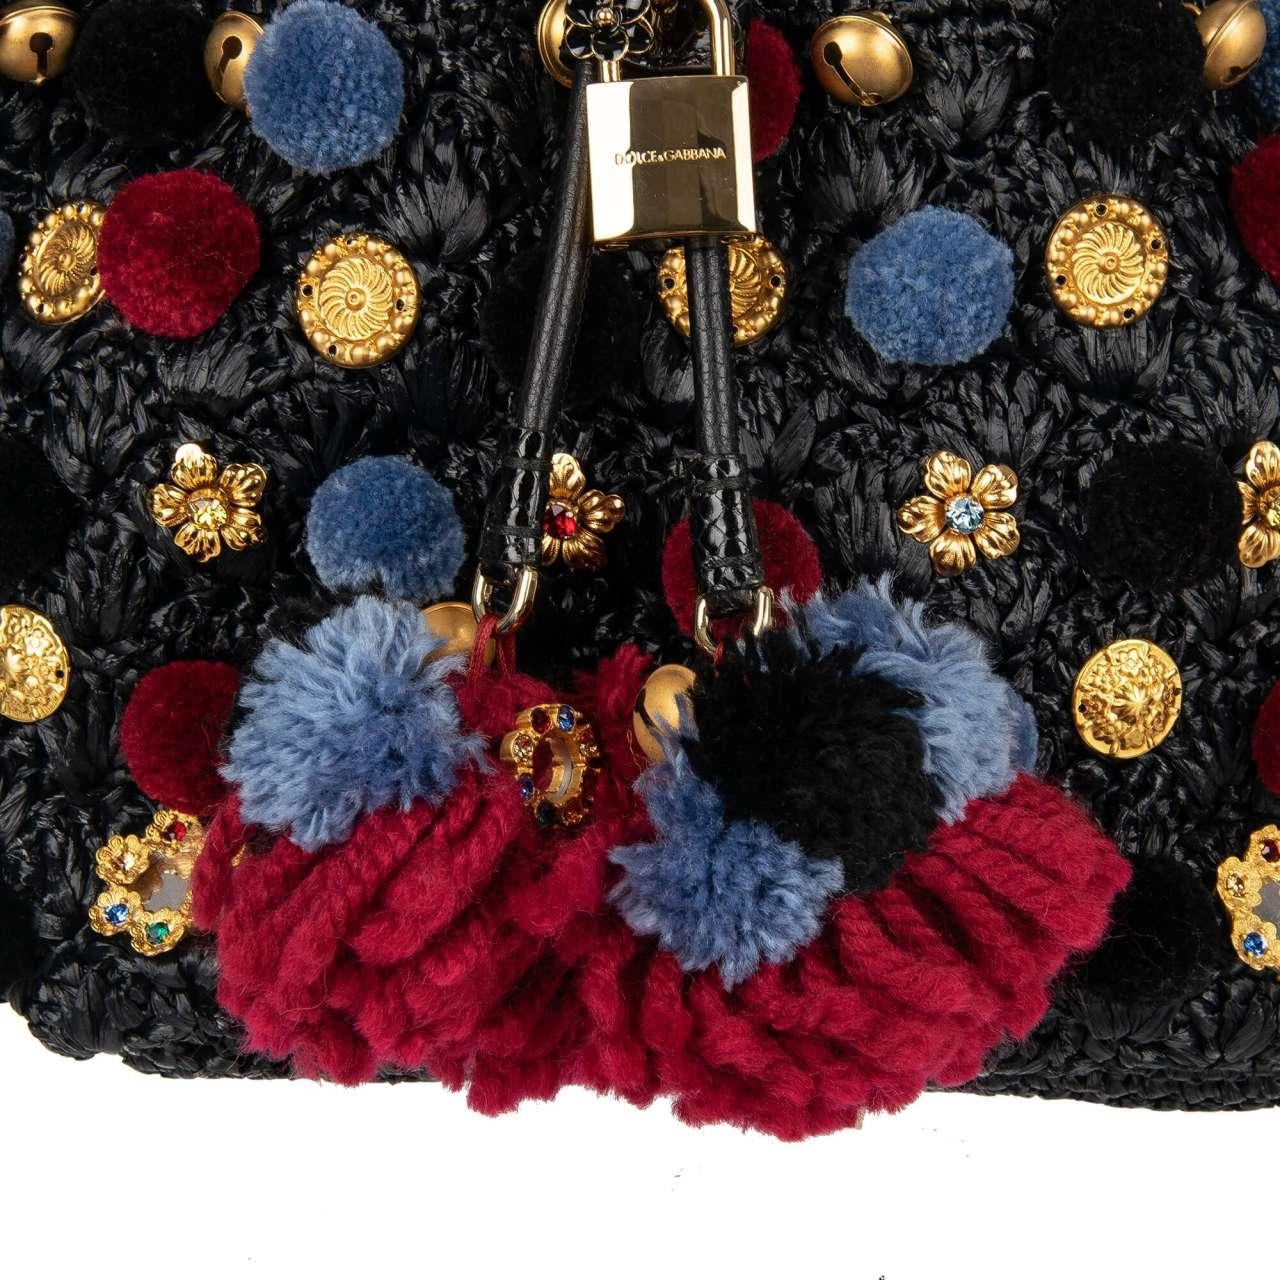 Dolce & Gabbana - Raffia Bucket Bag CLAUDIA with Pompoms and Crystals Black Red 3